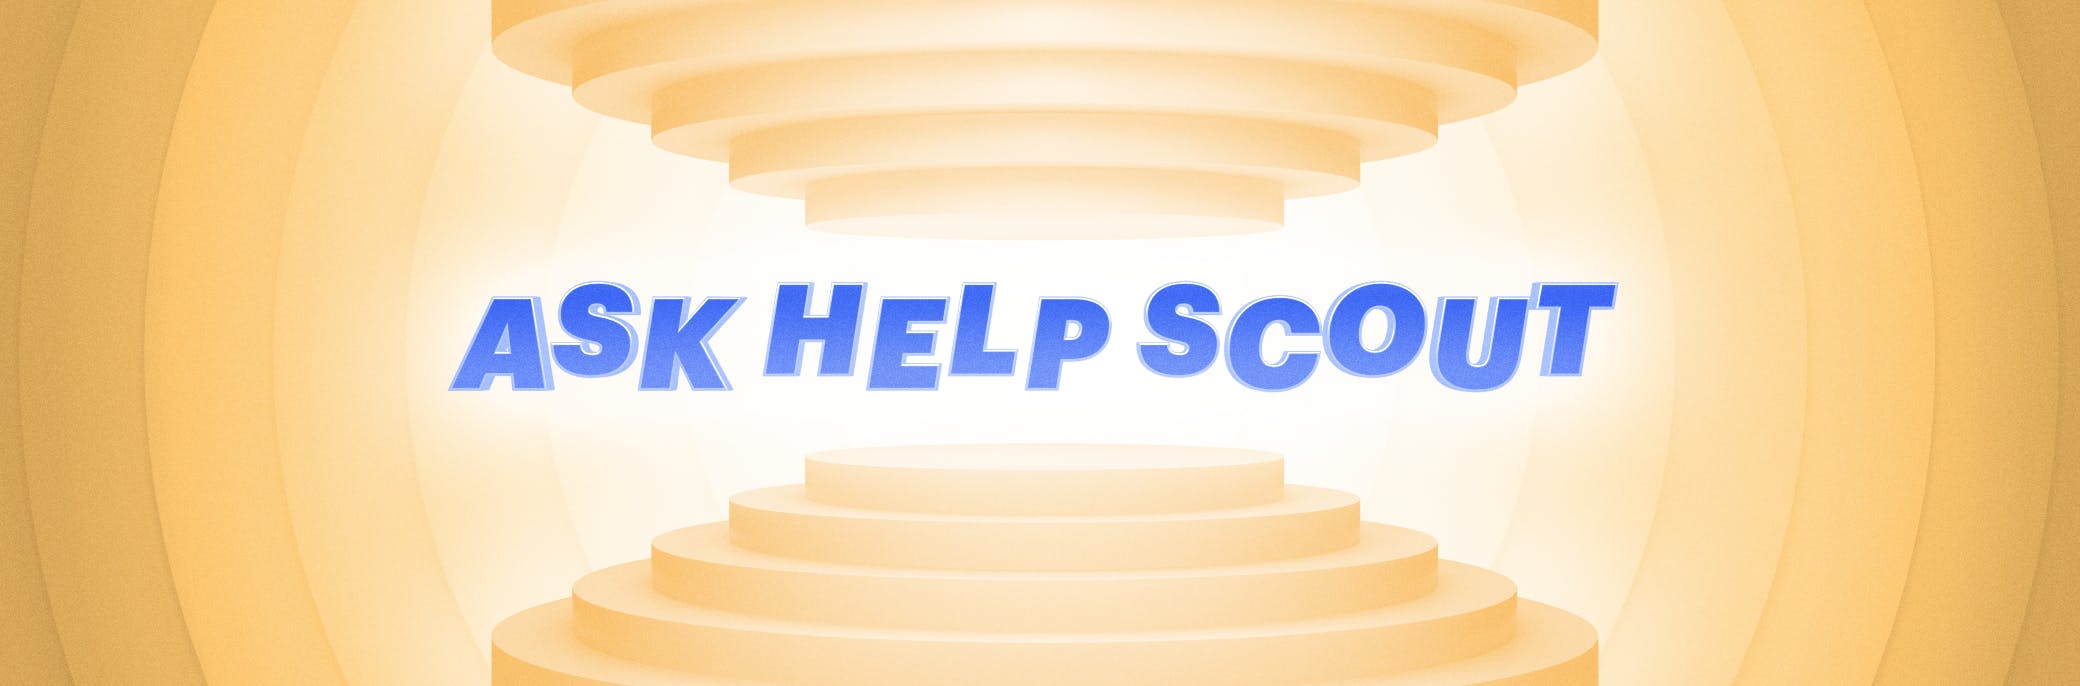 ask-help-scout-5